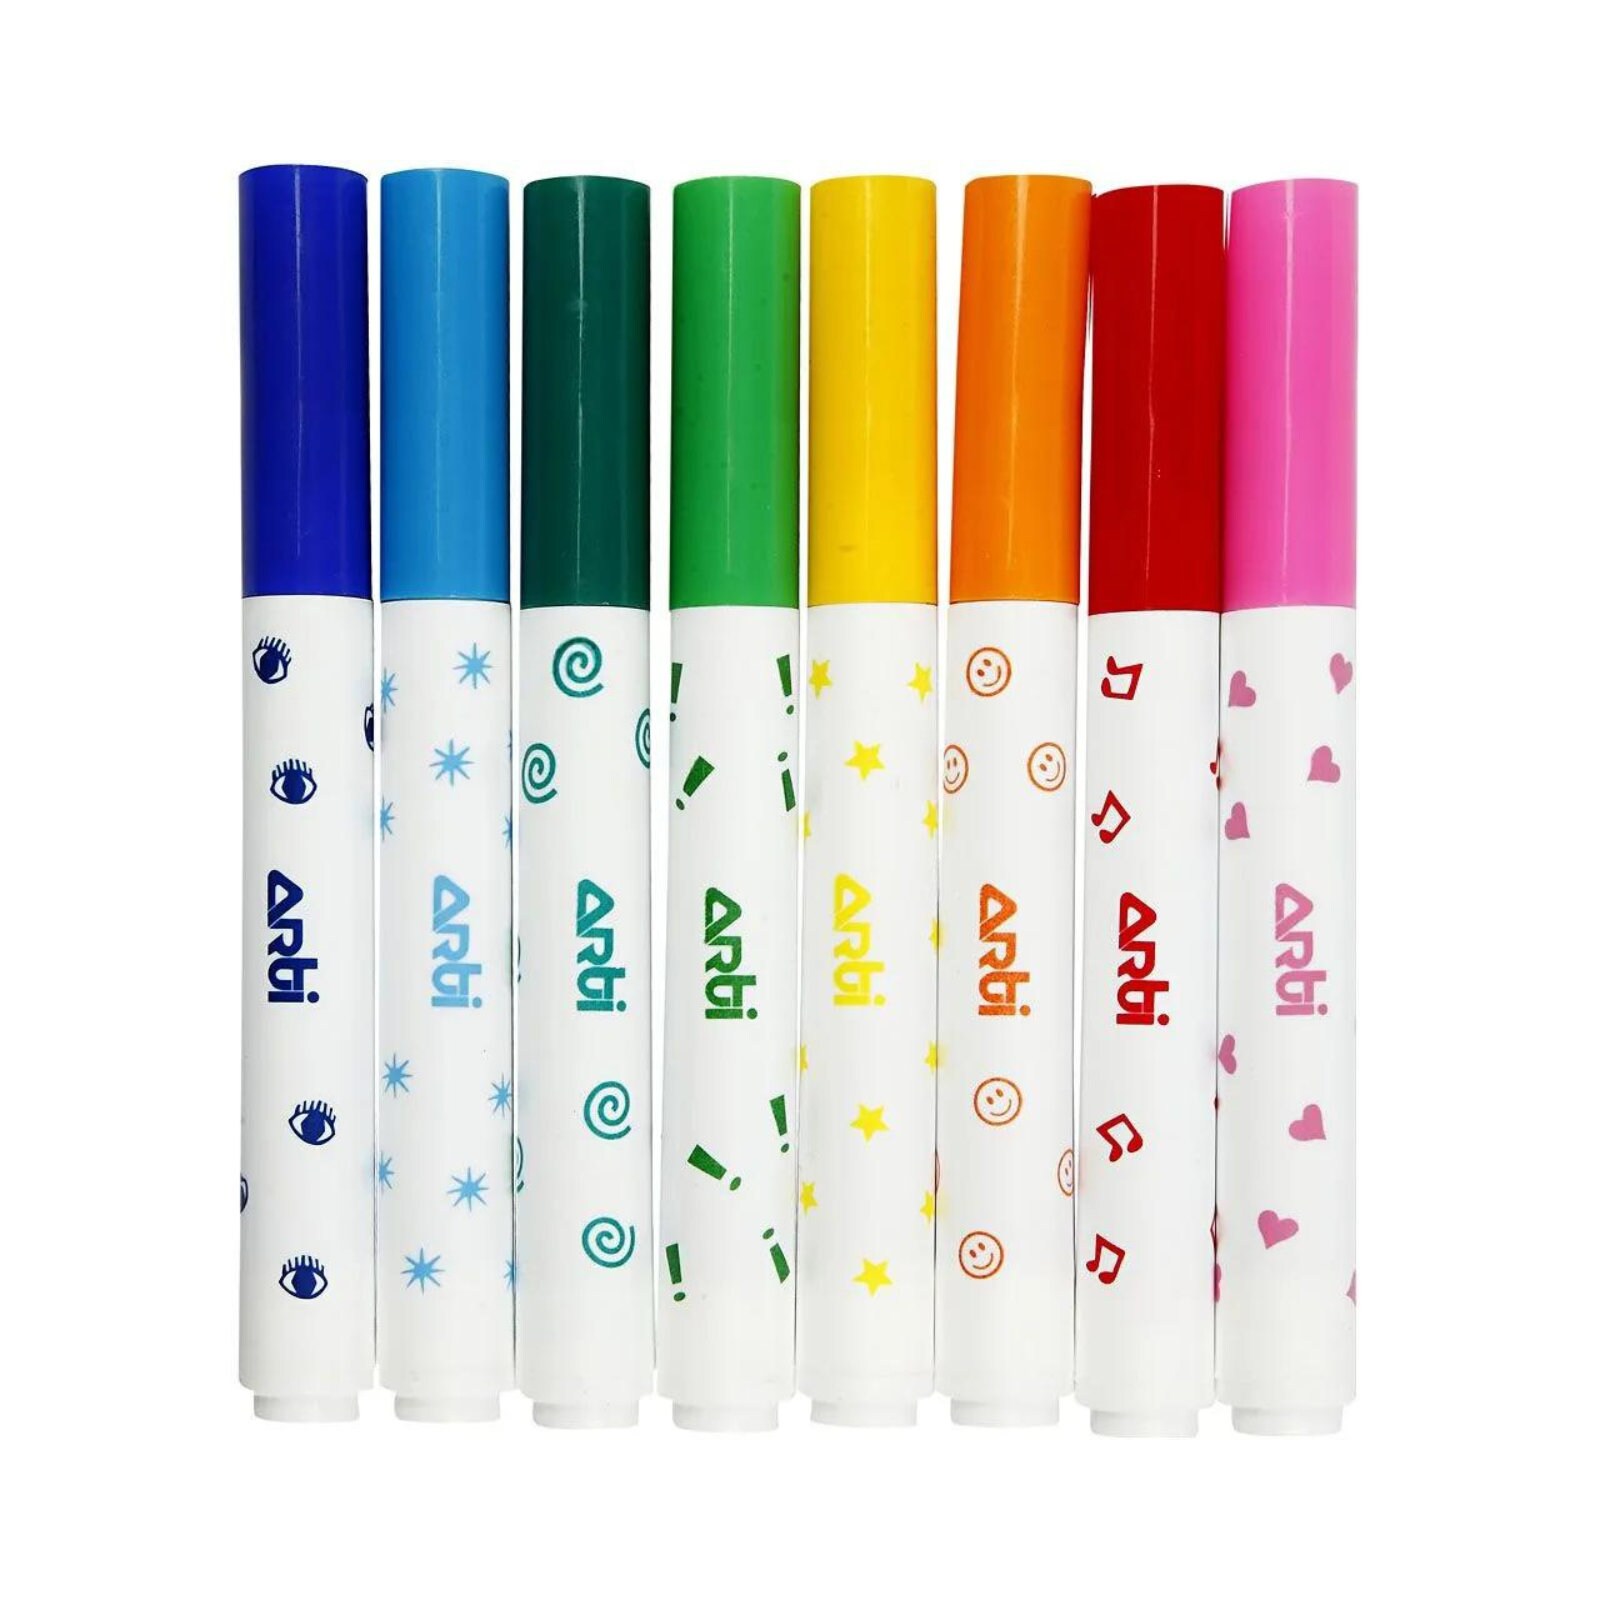 SES Creative Stamping with Markers - Bright, Bold Colored Washable Markers  with Stamp - Easy Grip Non-Toxic Paint Stamp Pen for Kids - 6 Colors